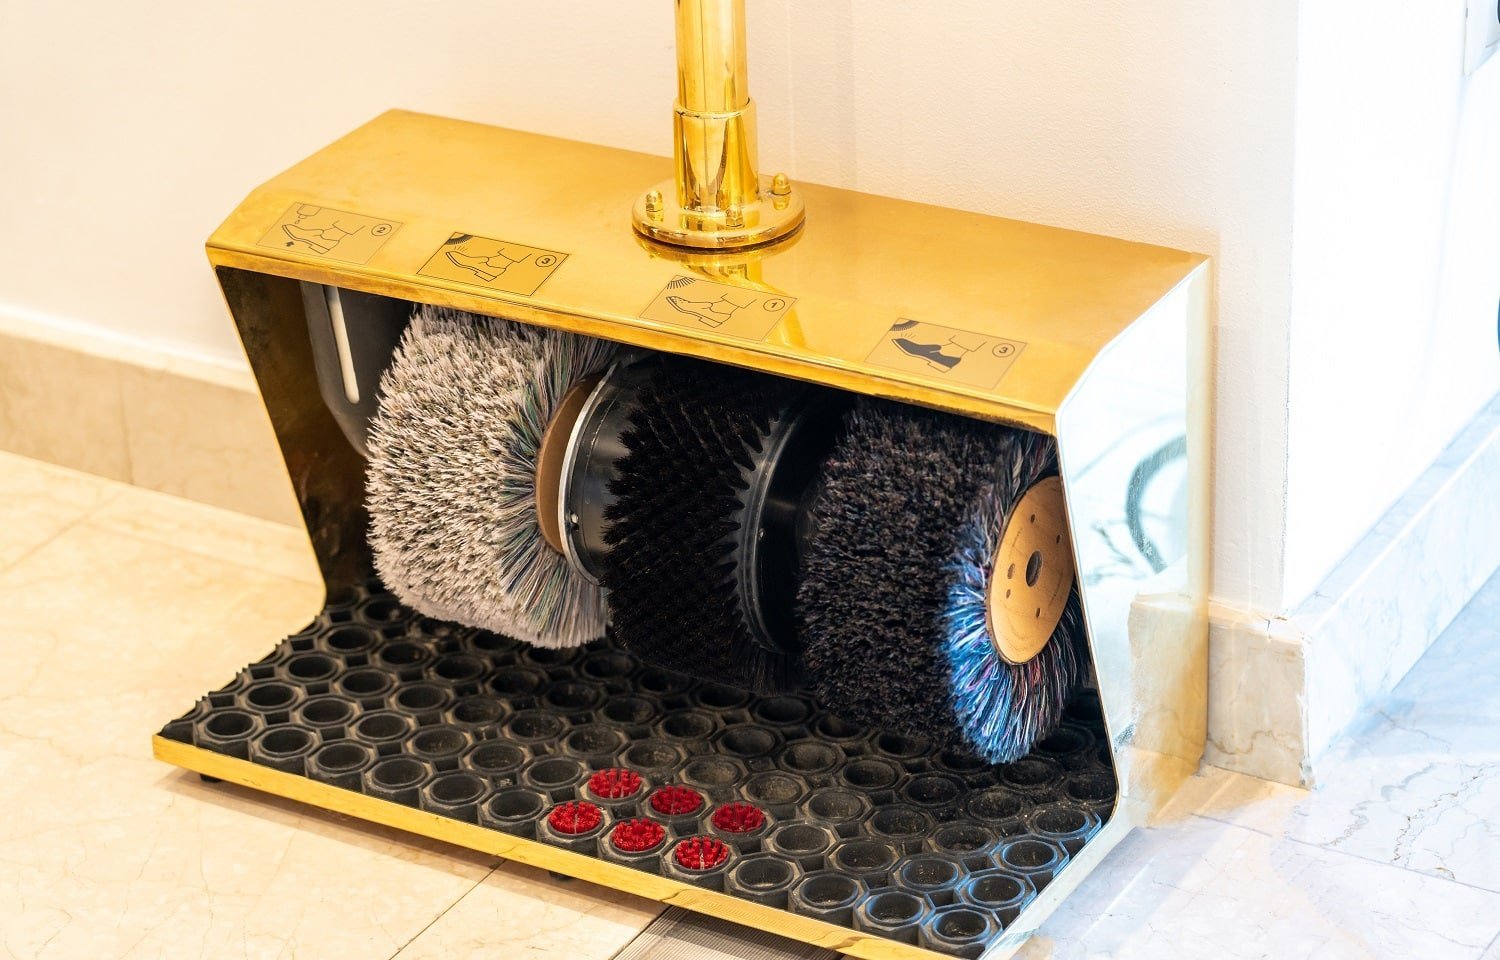 Electric Shoe Polisher Machine in the hotell